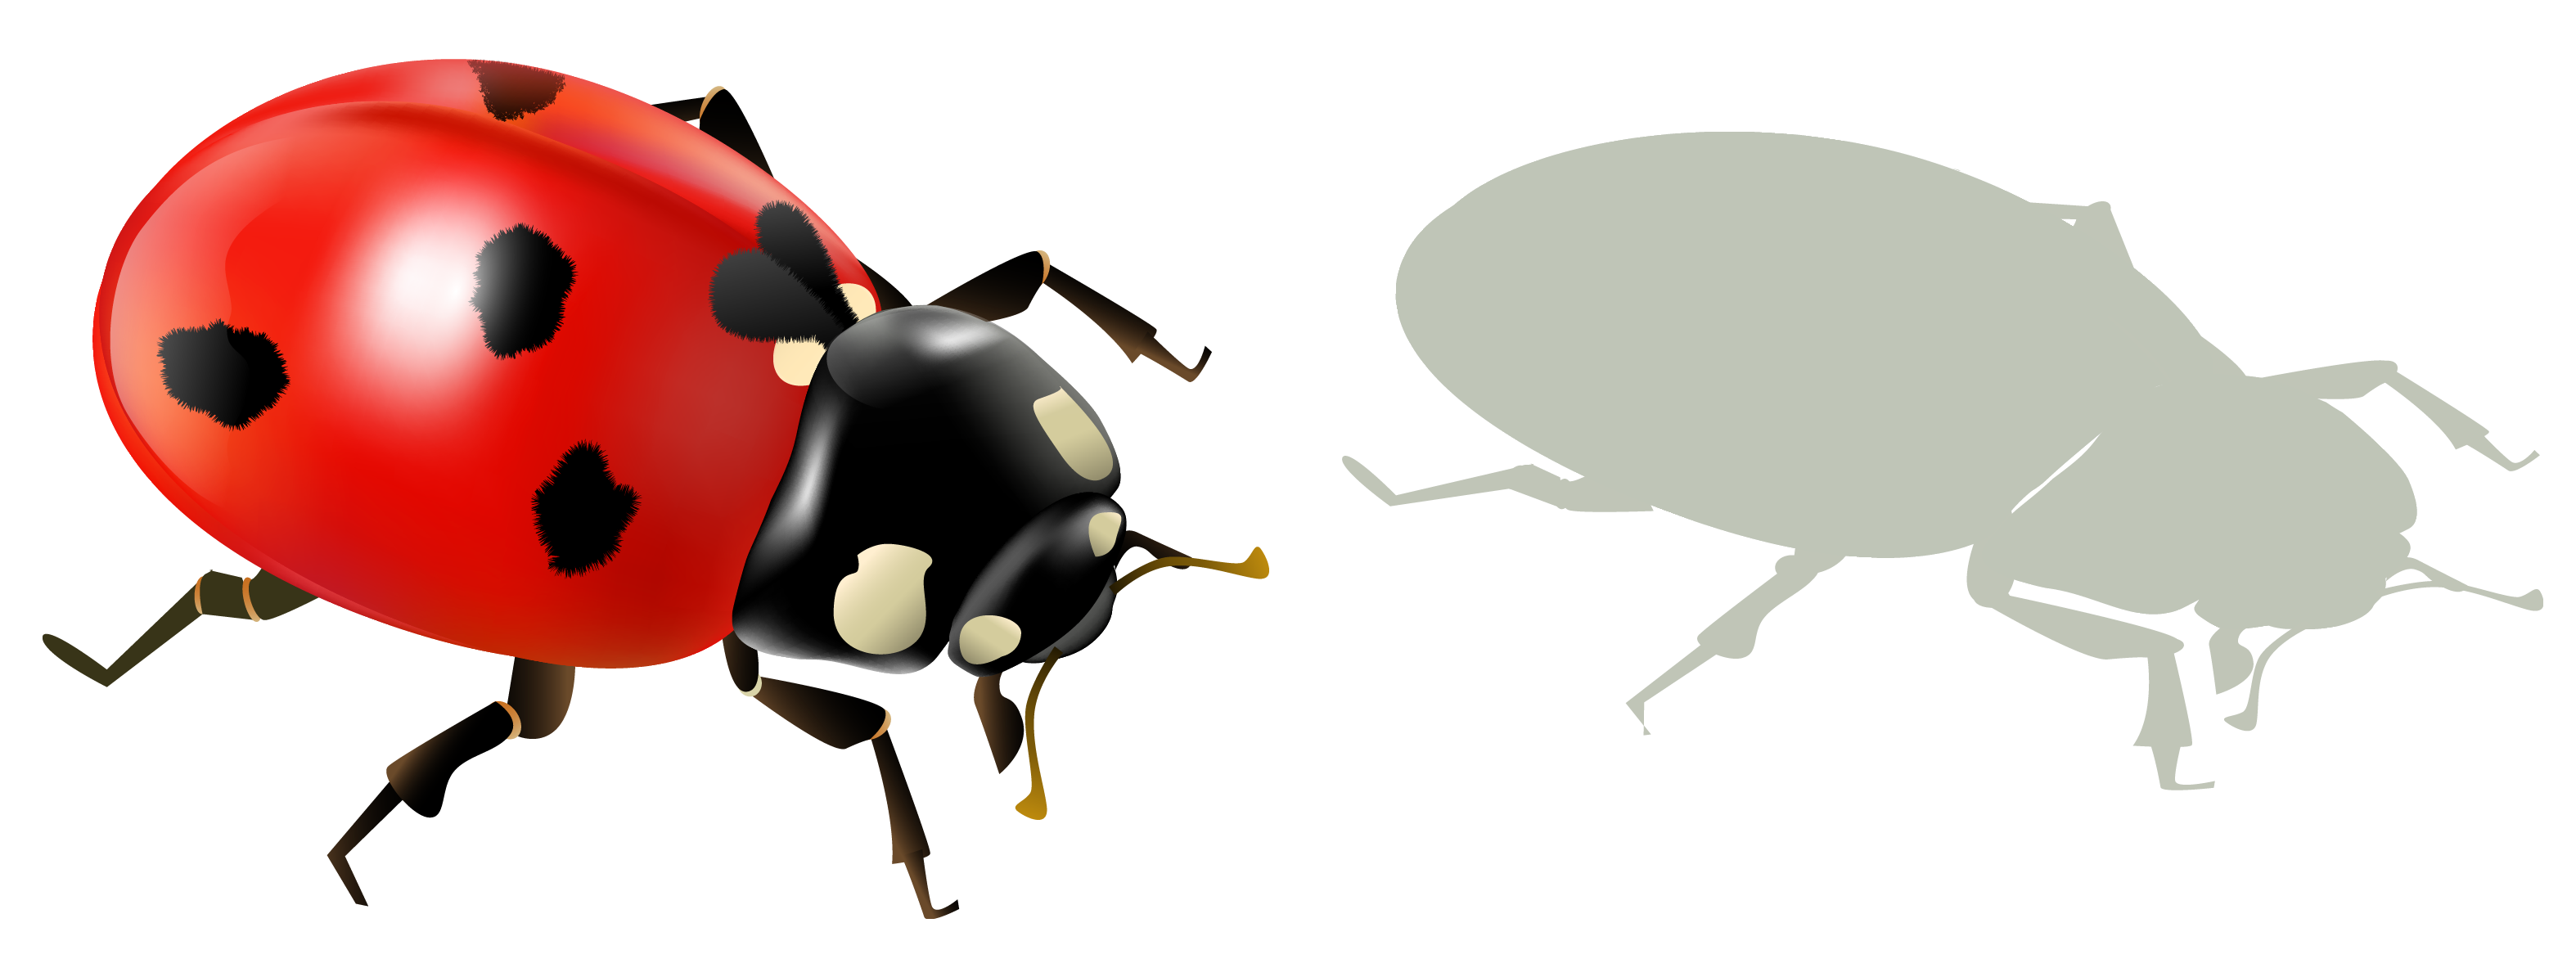 Ladybug Insect PNG Transparent Image